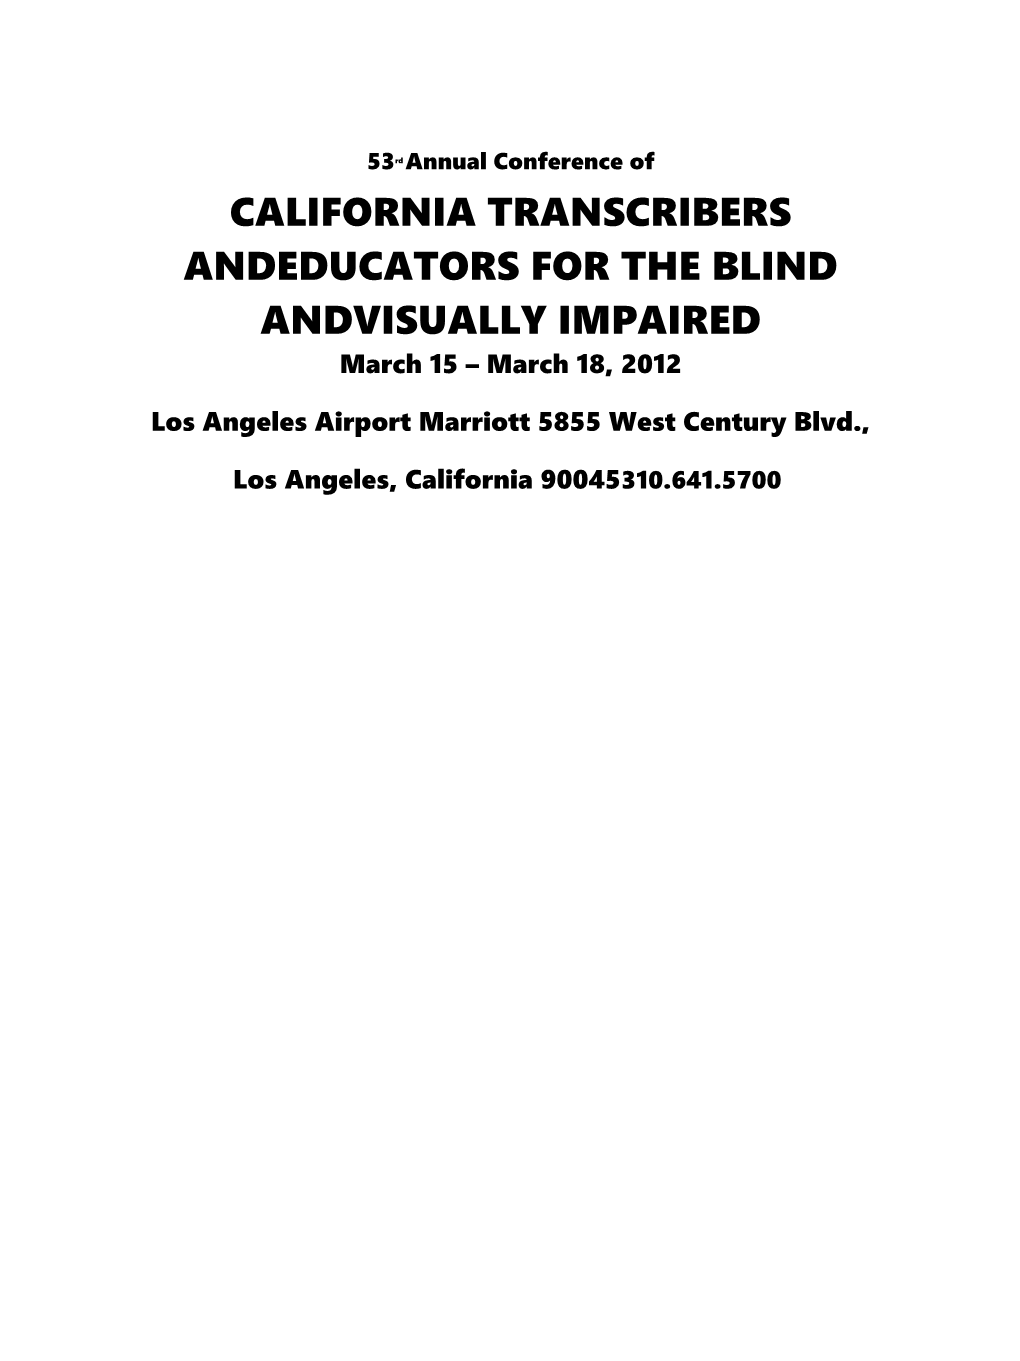 California Transcribers Andeducators for the Blind Andvisually Impaired